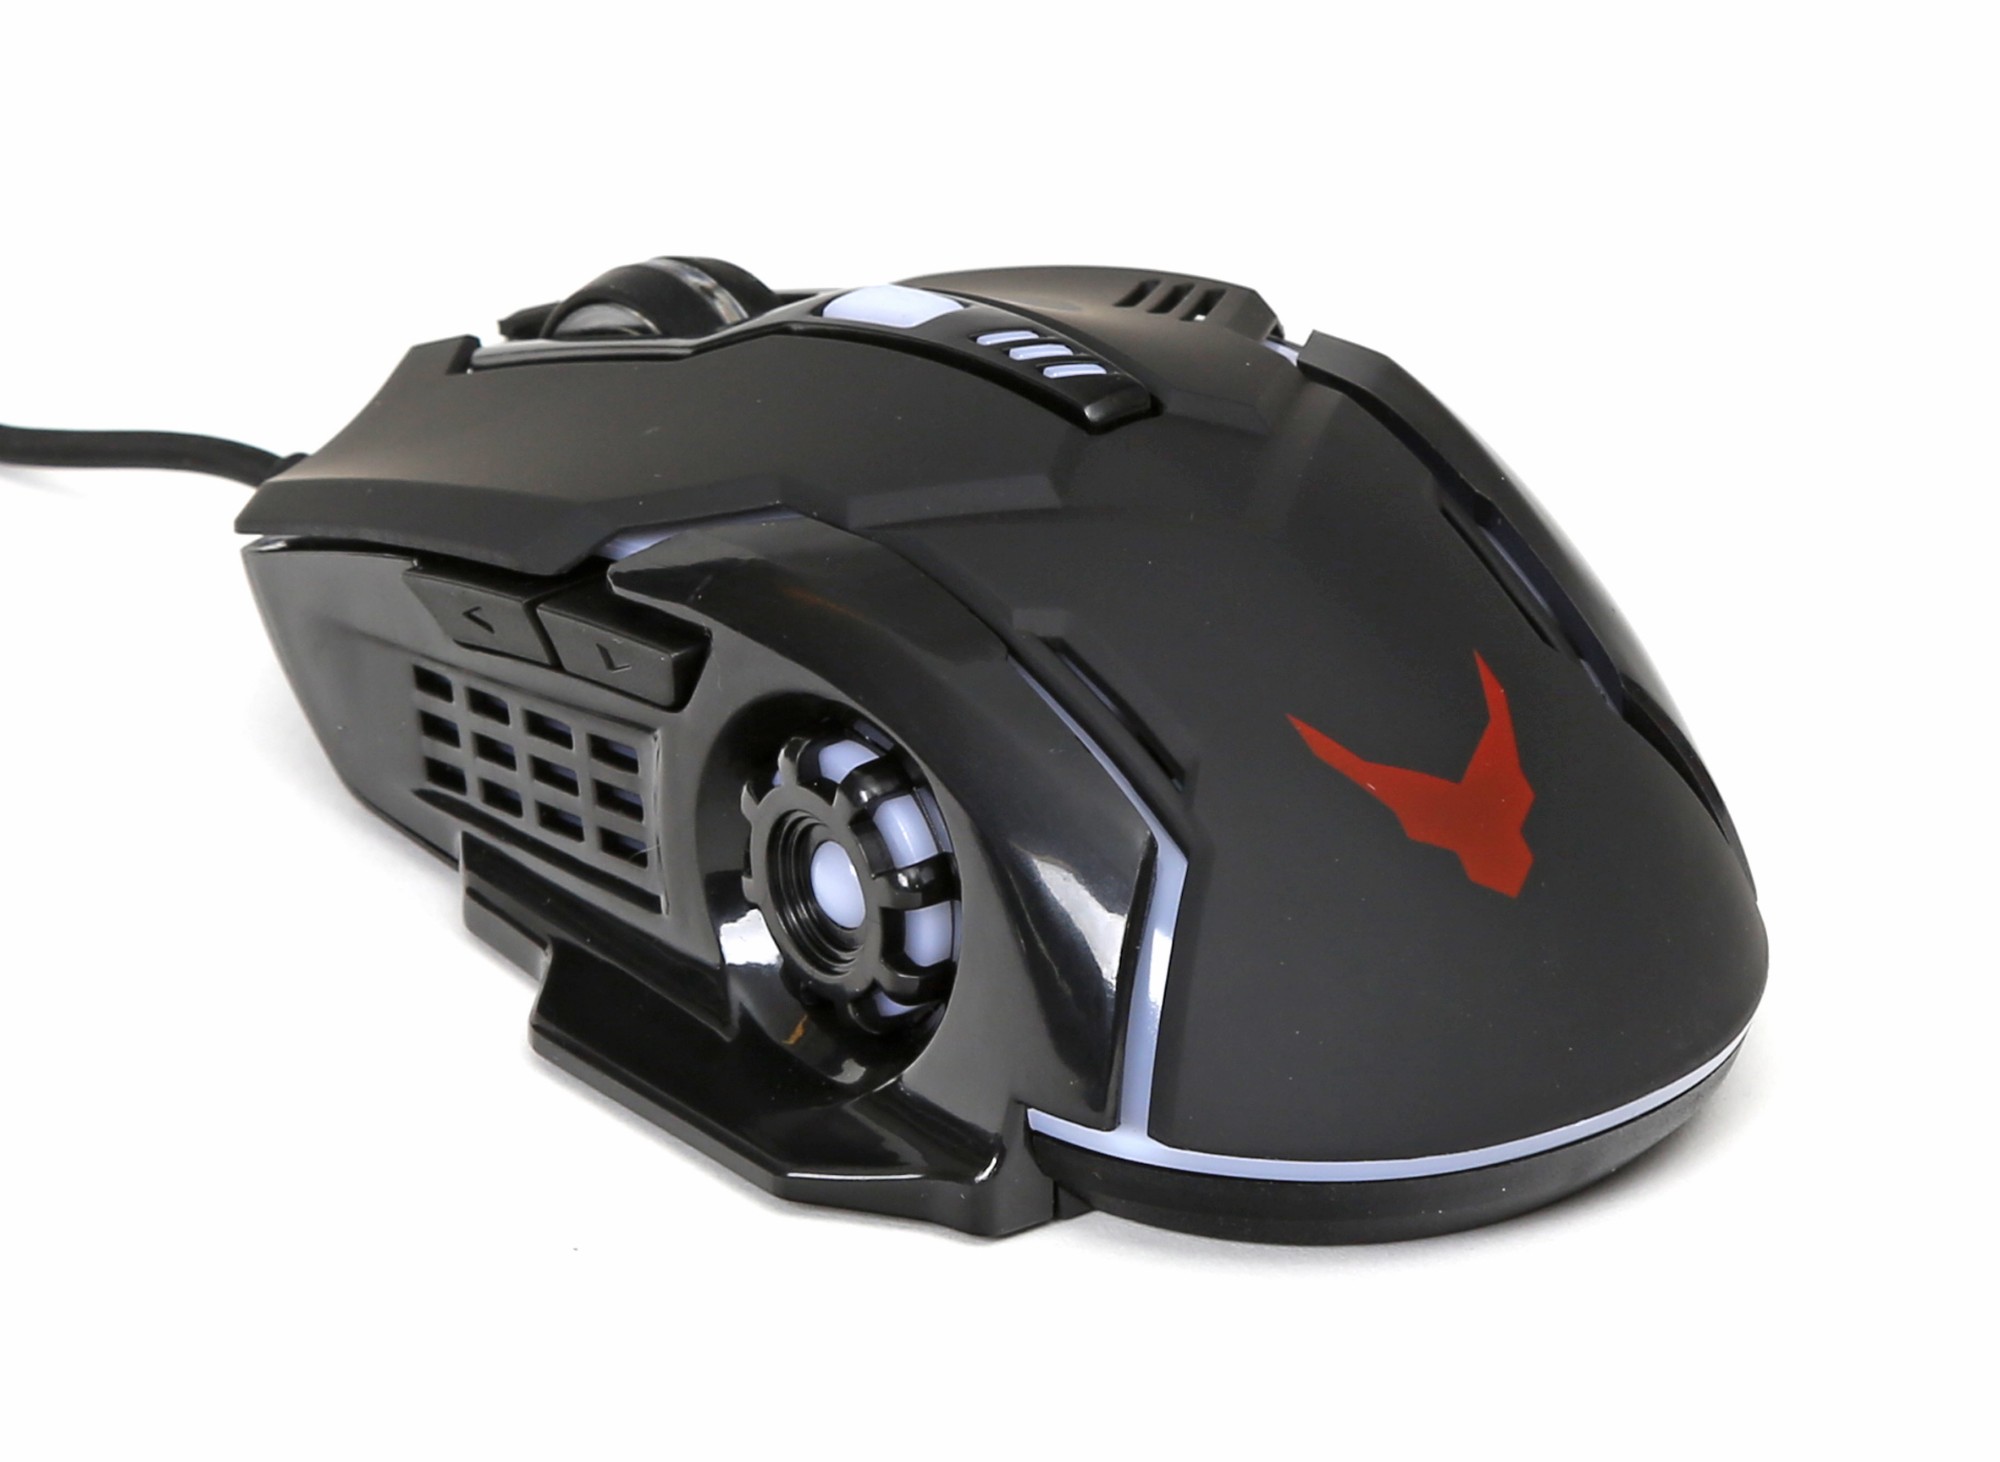 Varr Gaming USB Wired Mouse, Black (with 4 LED backlights), Adjustable DPI (800, 1200, 1600 or 2400dpi), Six Button with Scroll Wheel, Popular USB-A connection, Optical, Blister